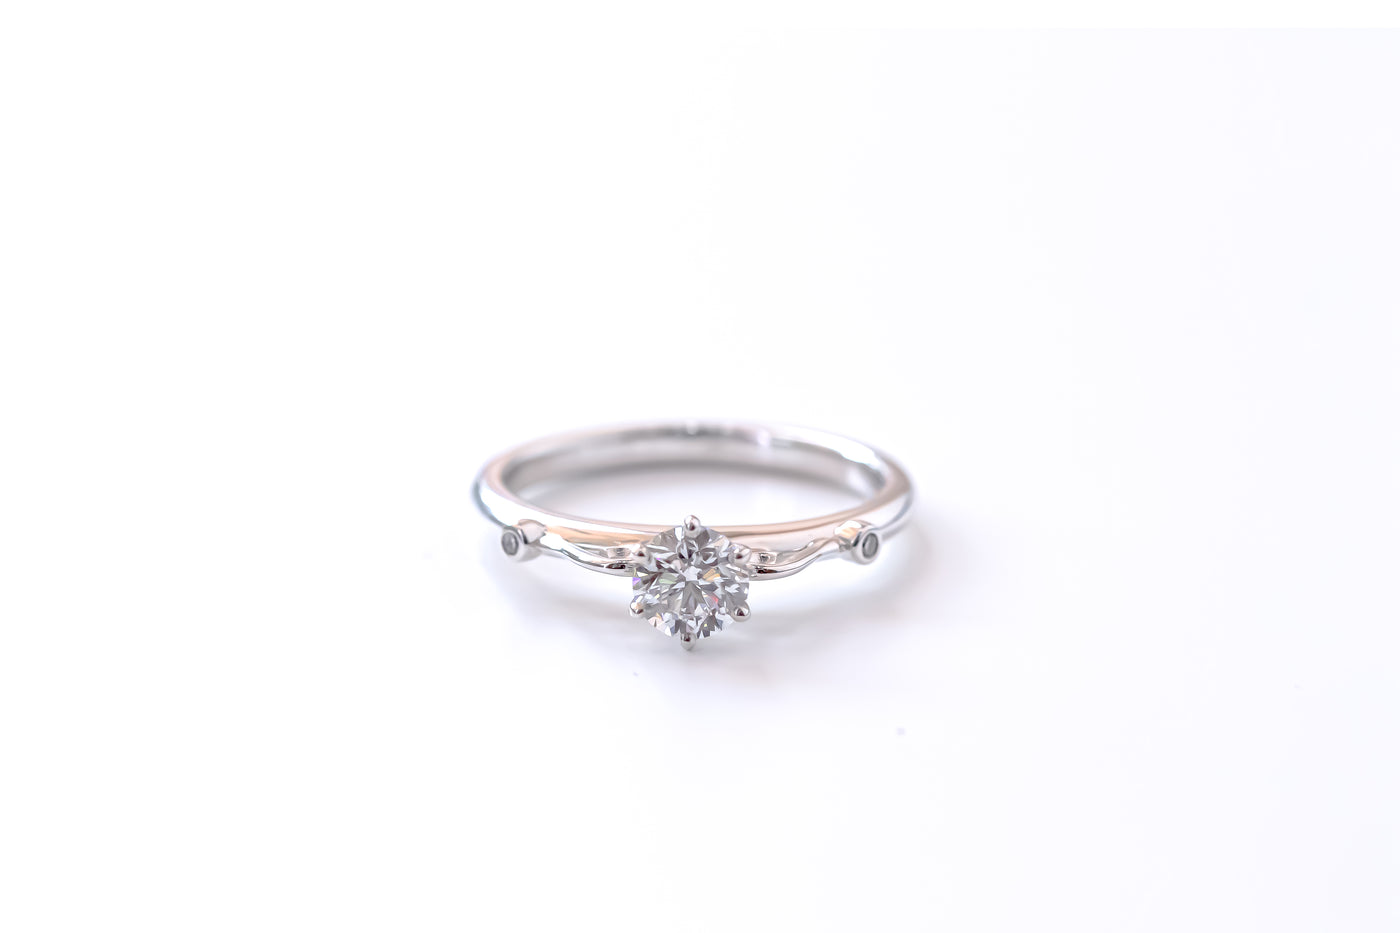 18ct White Gold 6 claw Diamond Engagement Ring